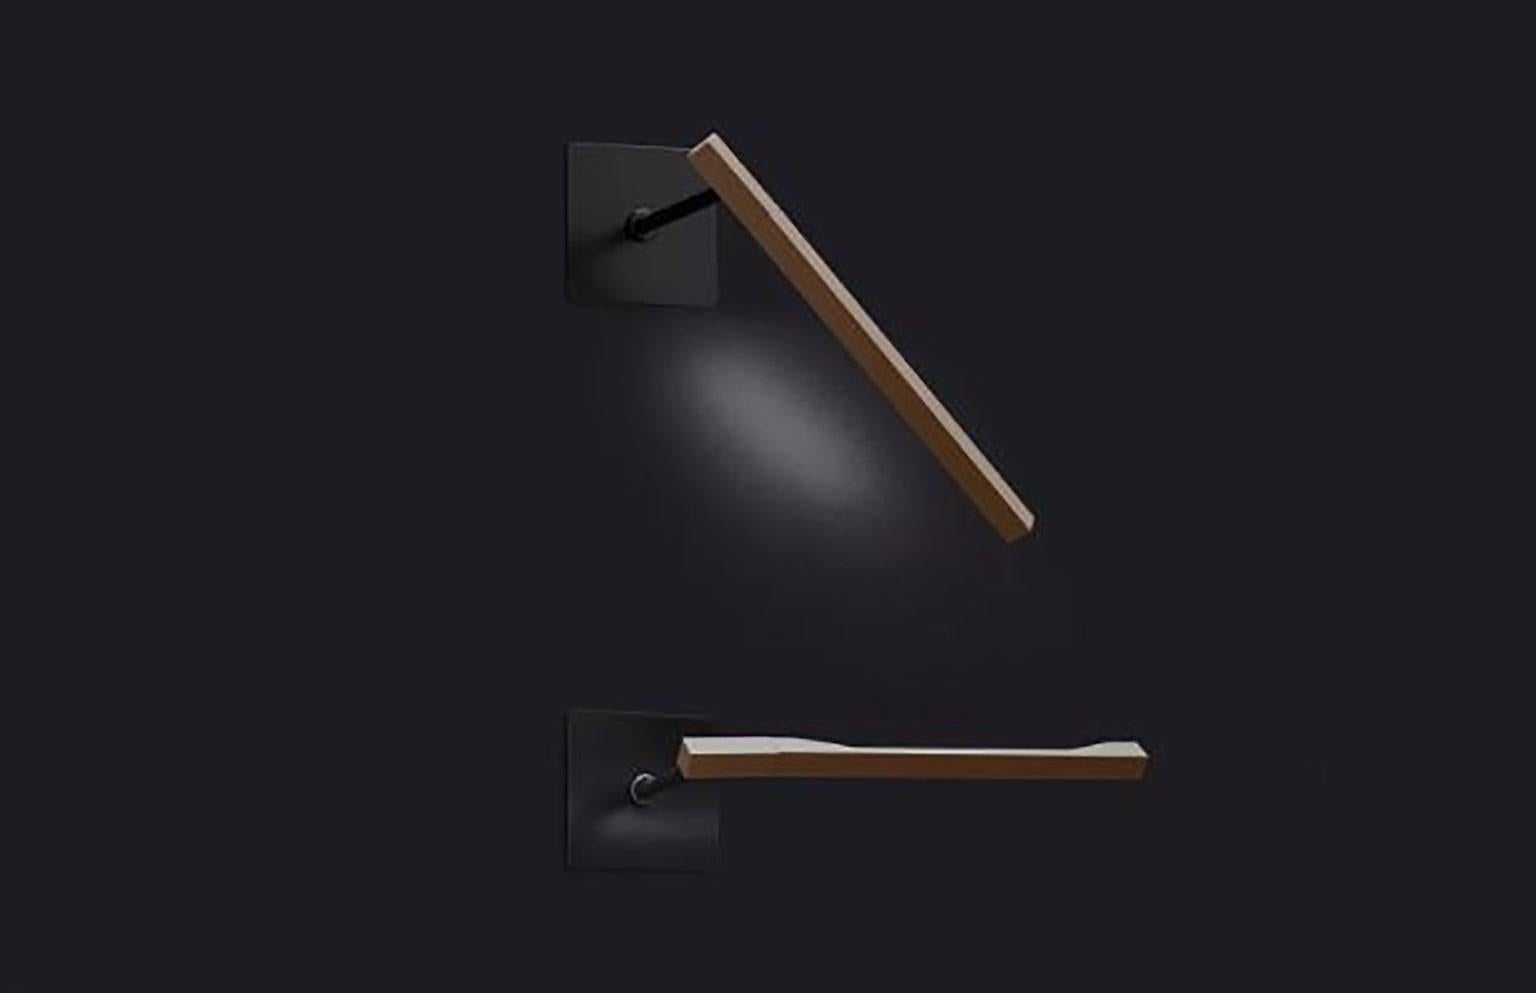 Ilo Wall Lamp by David Lopez Quincoces for Oluce. The simplicity in the design and the lightweight makes the lamp a remarkable piece for functional design. The light source is housed in a chromed bar which is slender in design and mounted on the